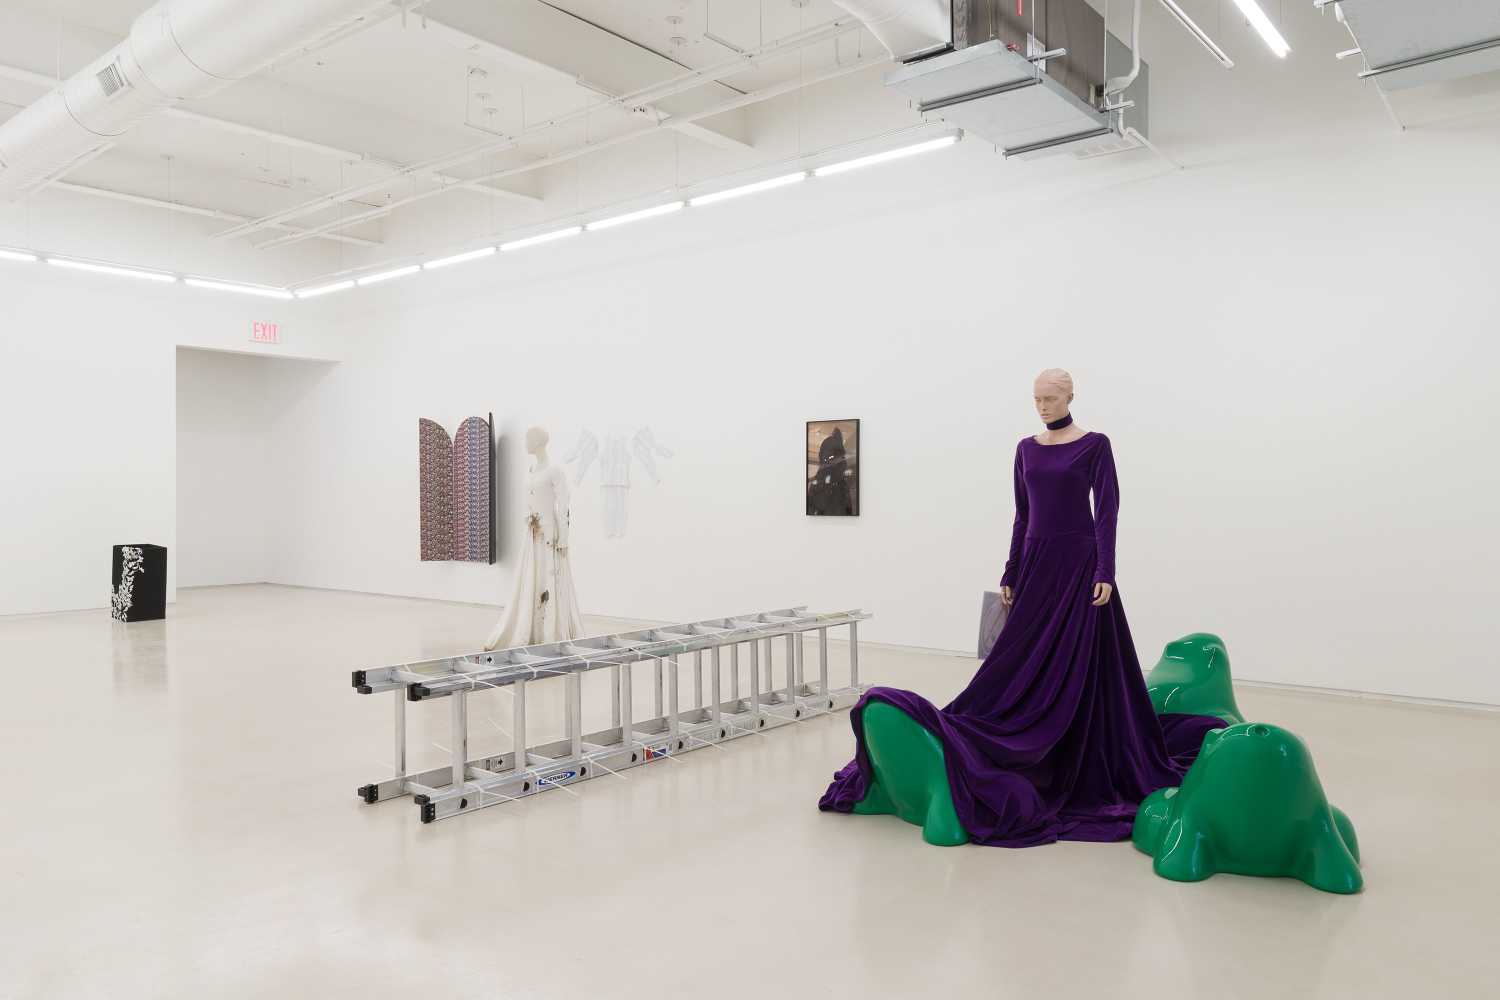 Installation view of Sin by Anna-Sophie Berger, the inaugural exhibitions at JTT's new home in Tribeca, New York, designed by Bureau V Architecture.